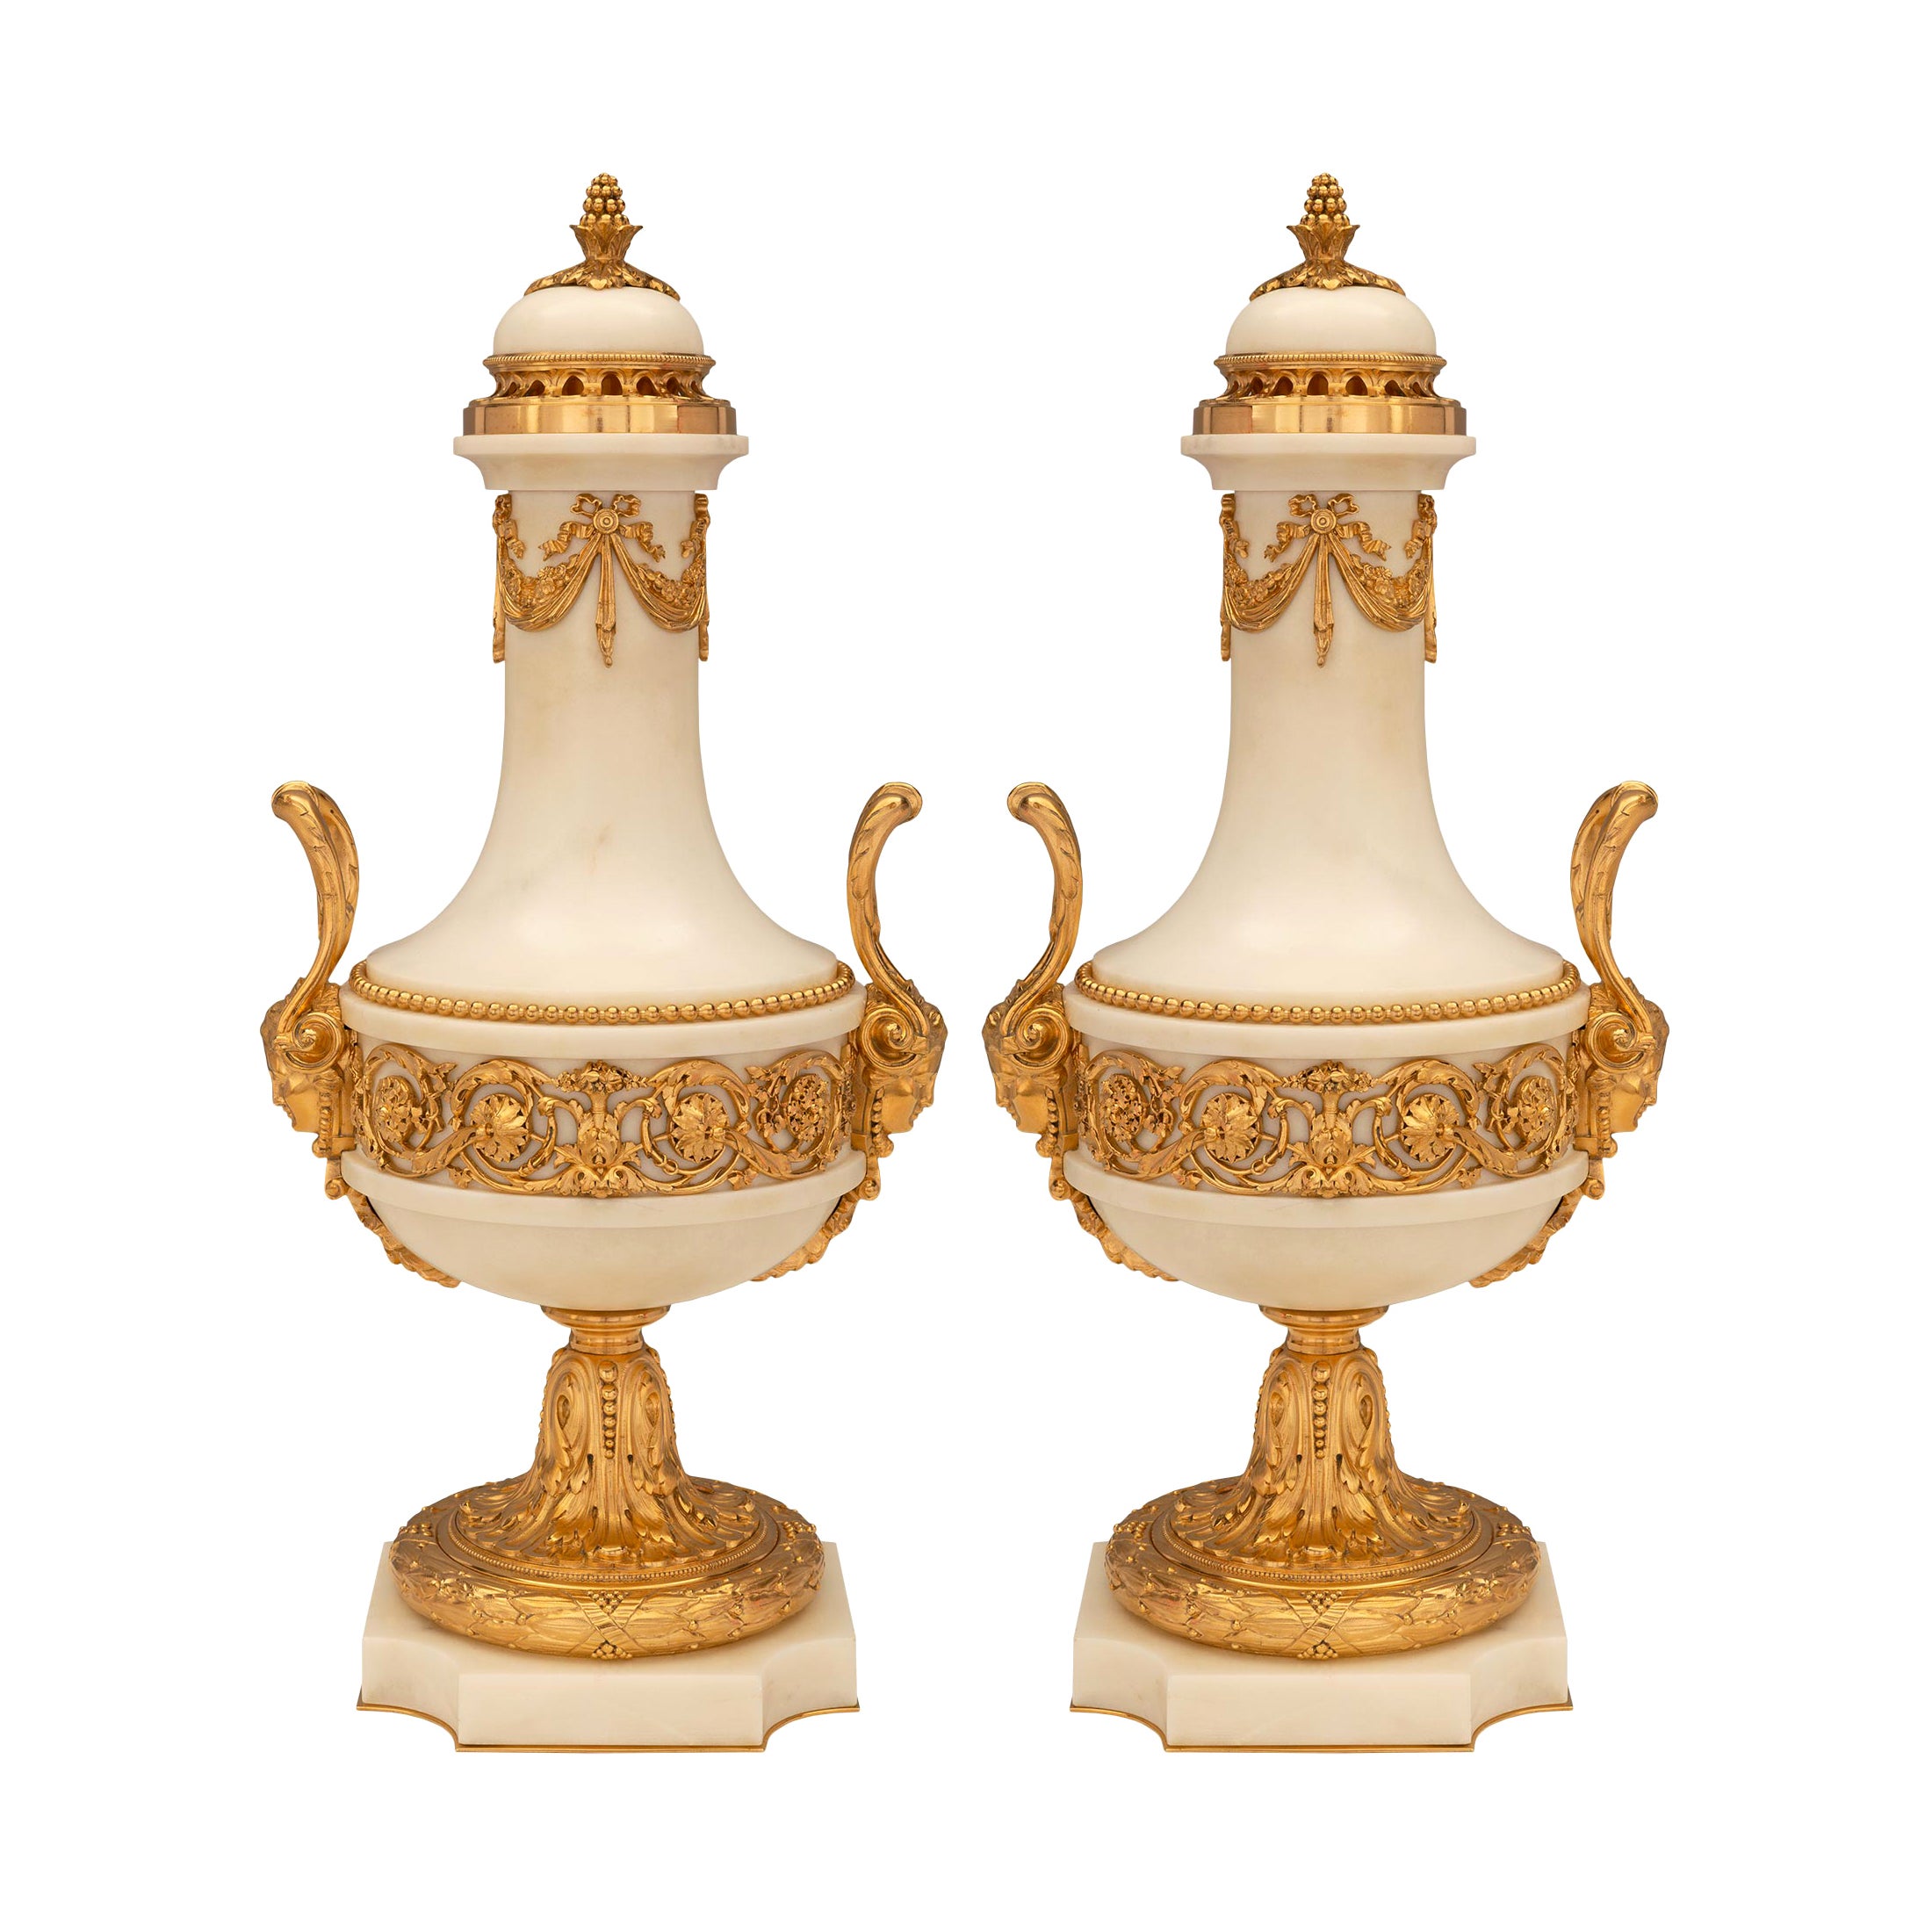 Pair Of French 19th Century Belle Époque Period Marble And Ormolu Lidded Urns For Sale